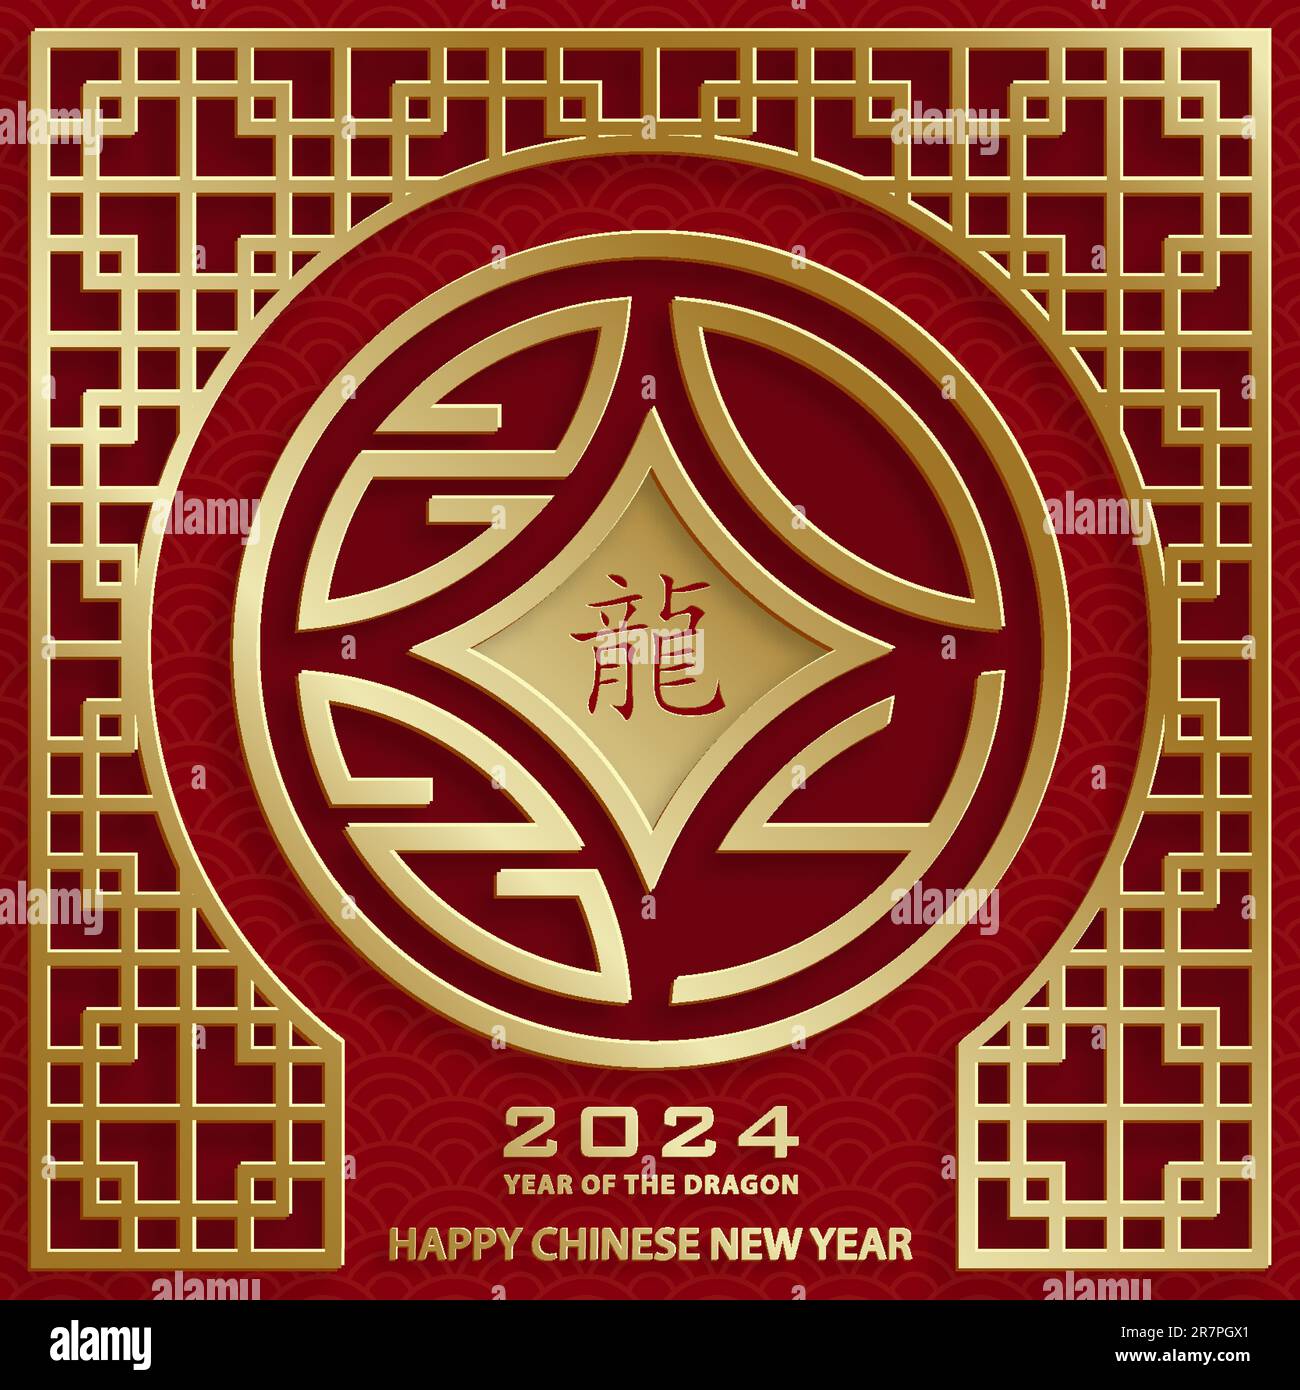 Premium Vector  Chinese new year 2024 lucky red envelope money